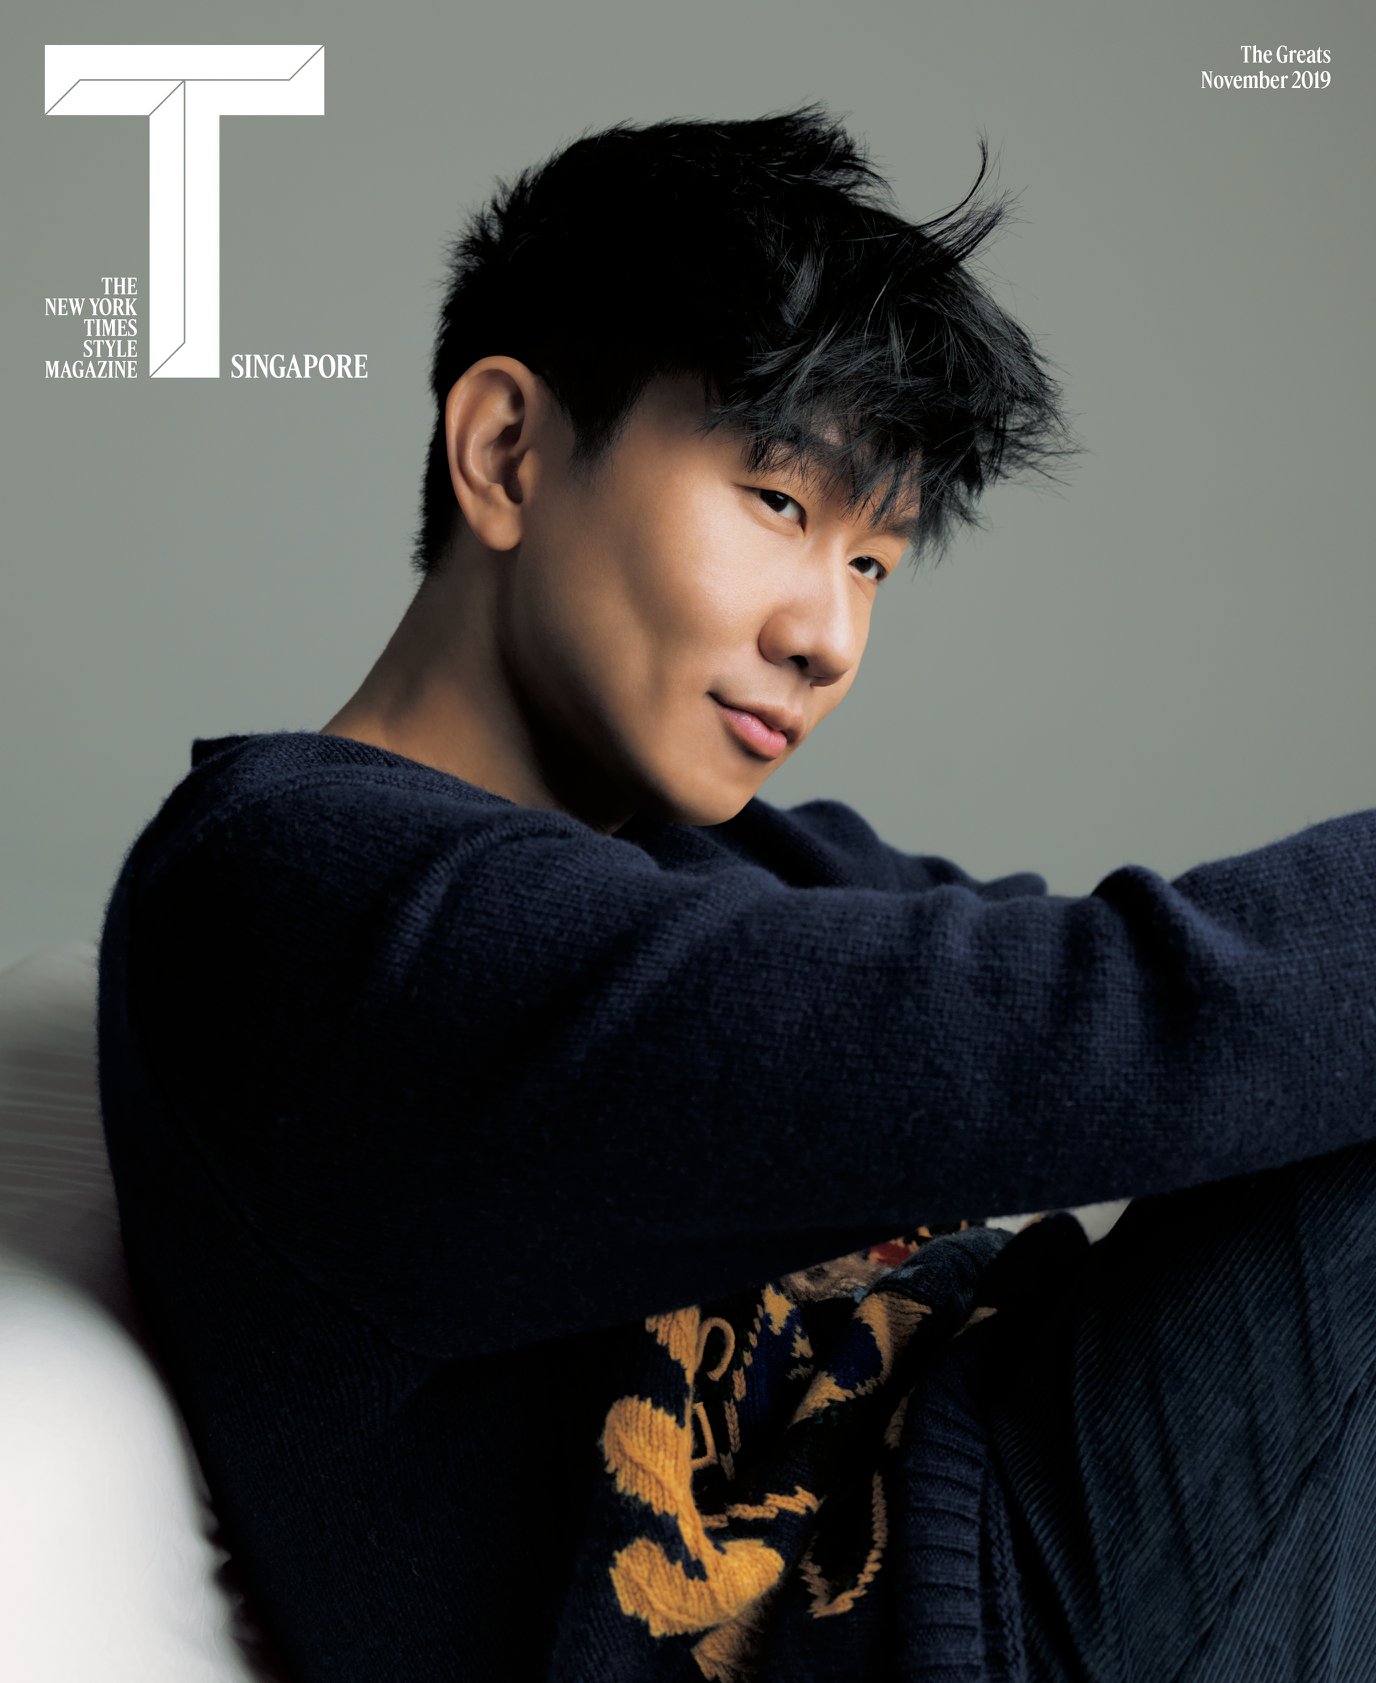 JJ Lin (林俊杰) in Polo Ralph Lauren and Purple Label Fall 2019 for the cover and cover story of The New York Times Style Magazine Singapore November 2019 issue. @tsingapore Photographer: Charles Guo (@charlesguoguo)